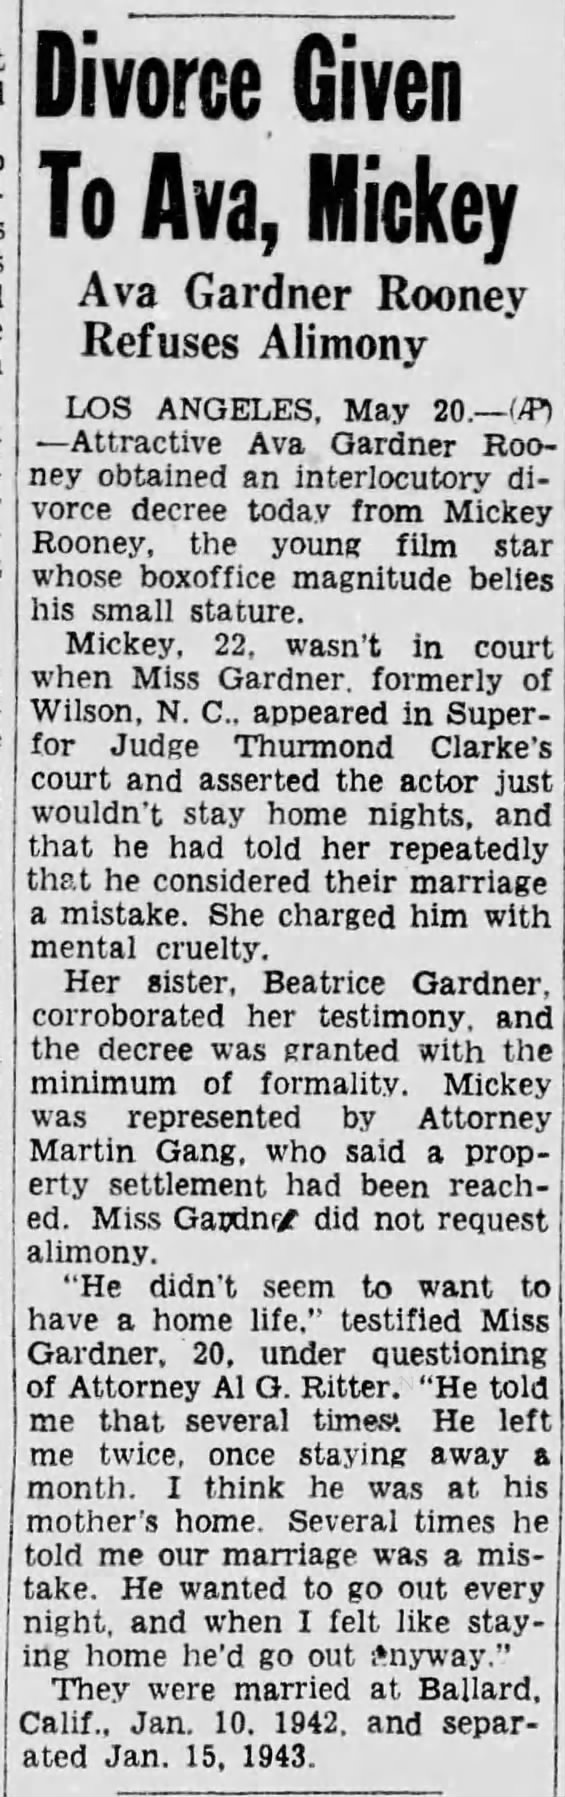 Divorce Given To Ava, Mickey